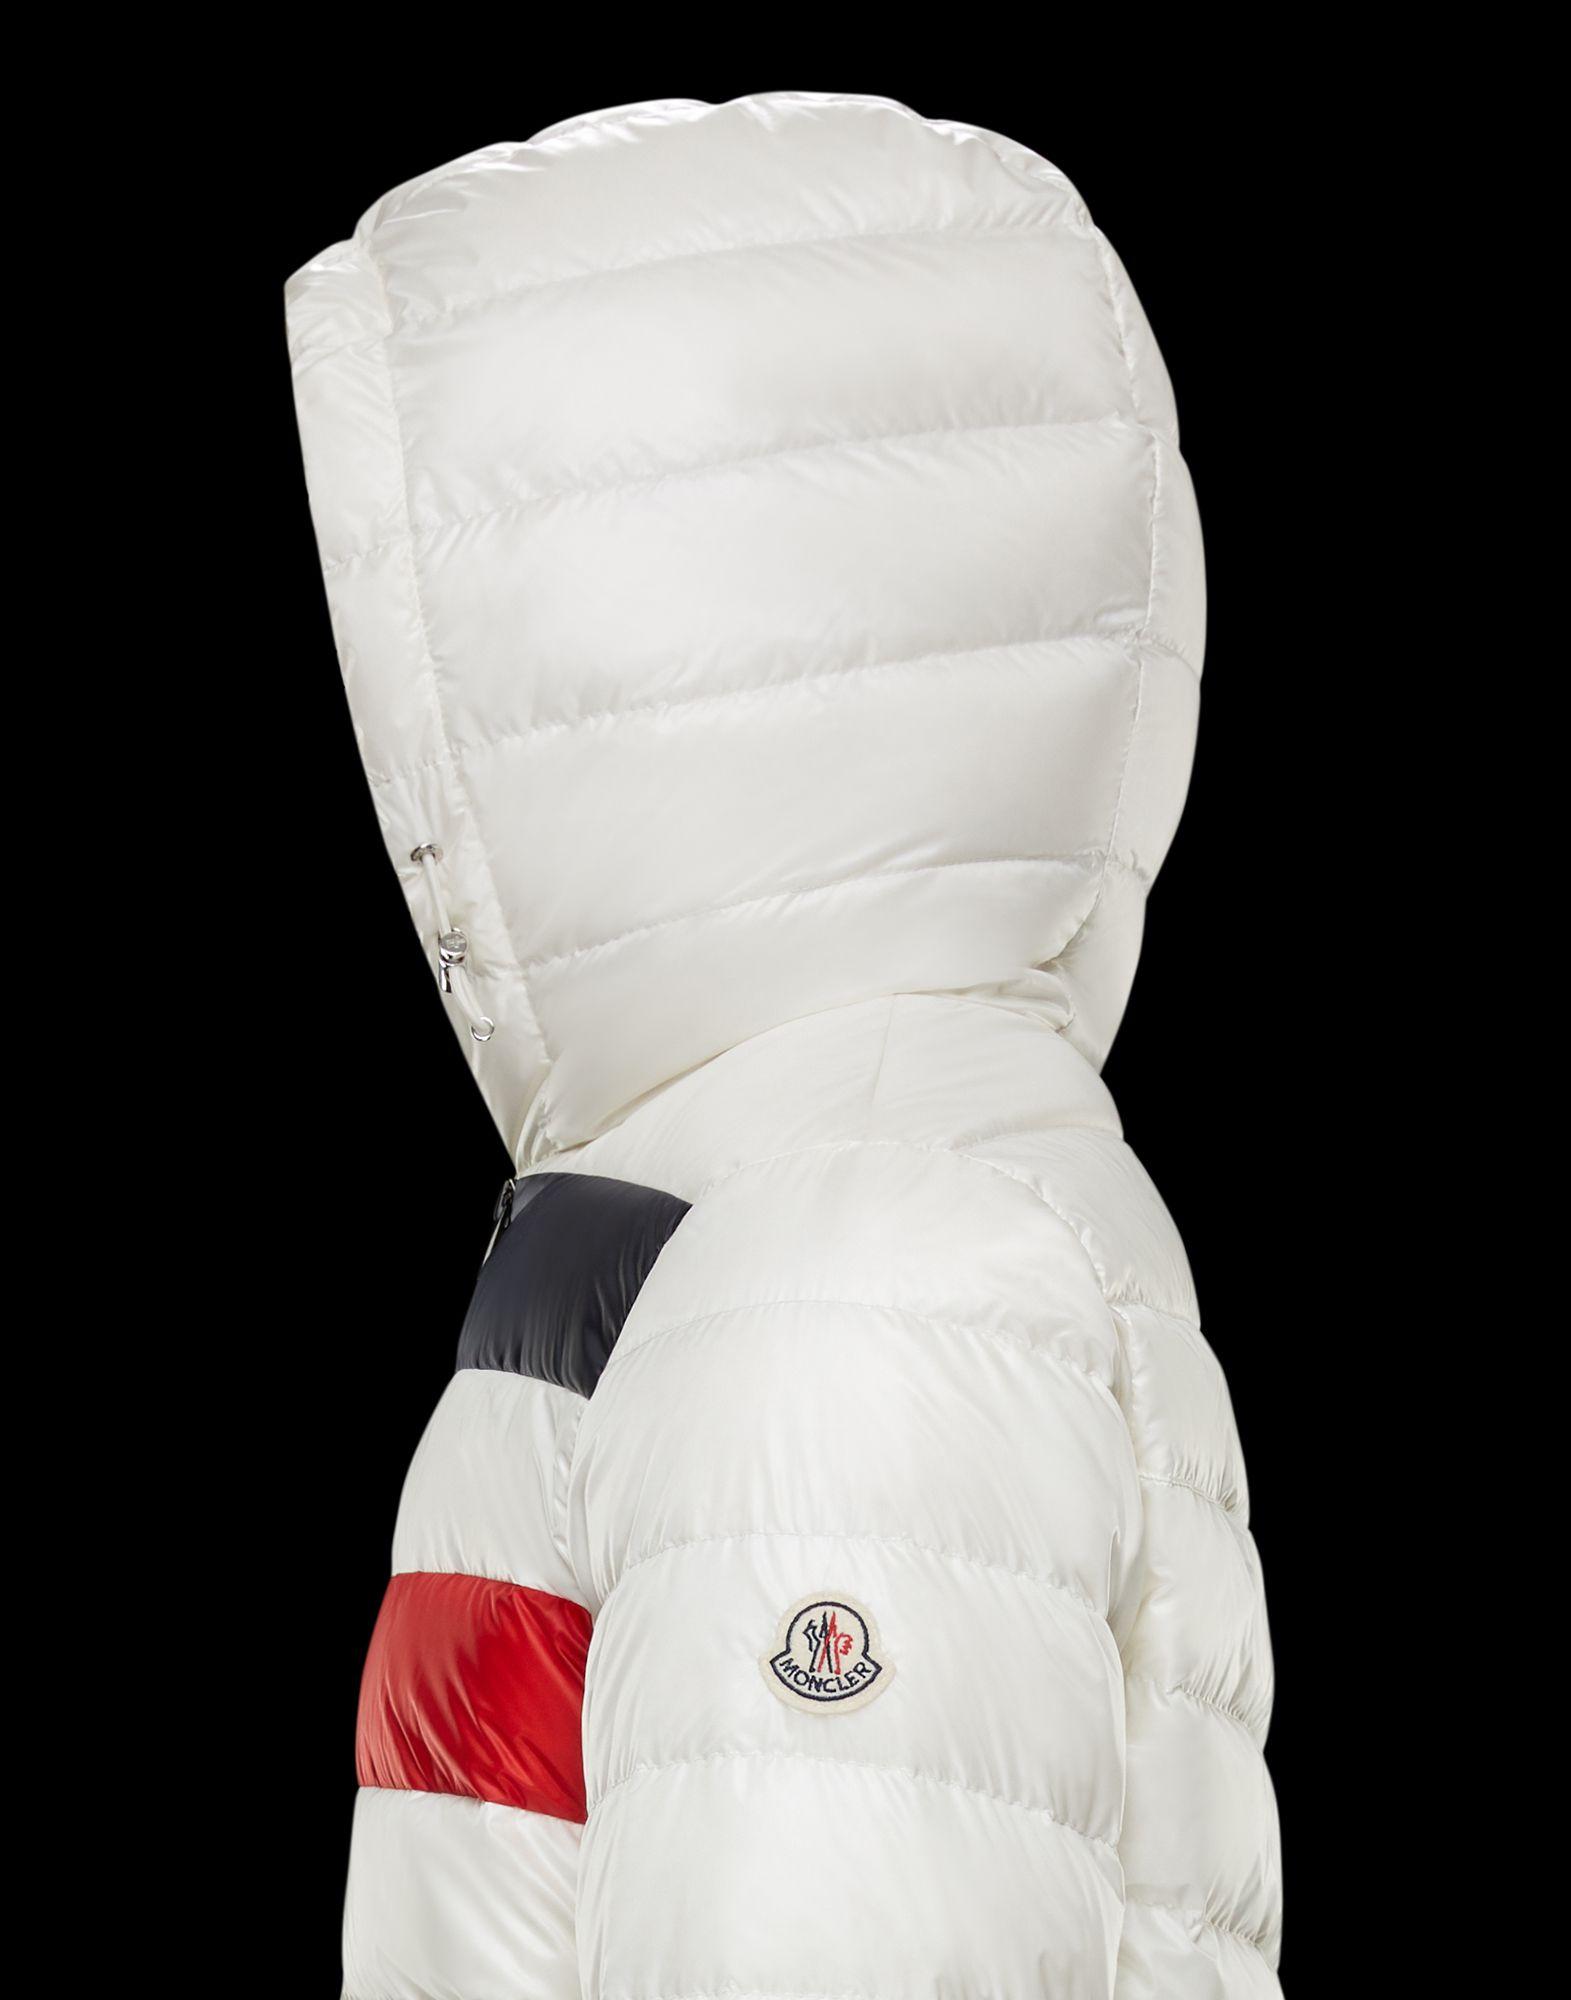 Moncler Synthetic Kourou Down Jacket in White for Men - Lyst